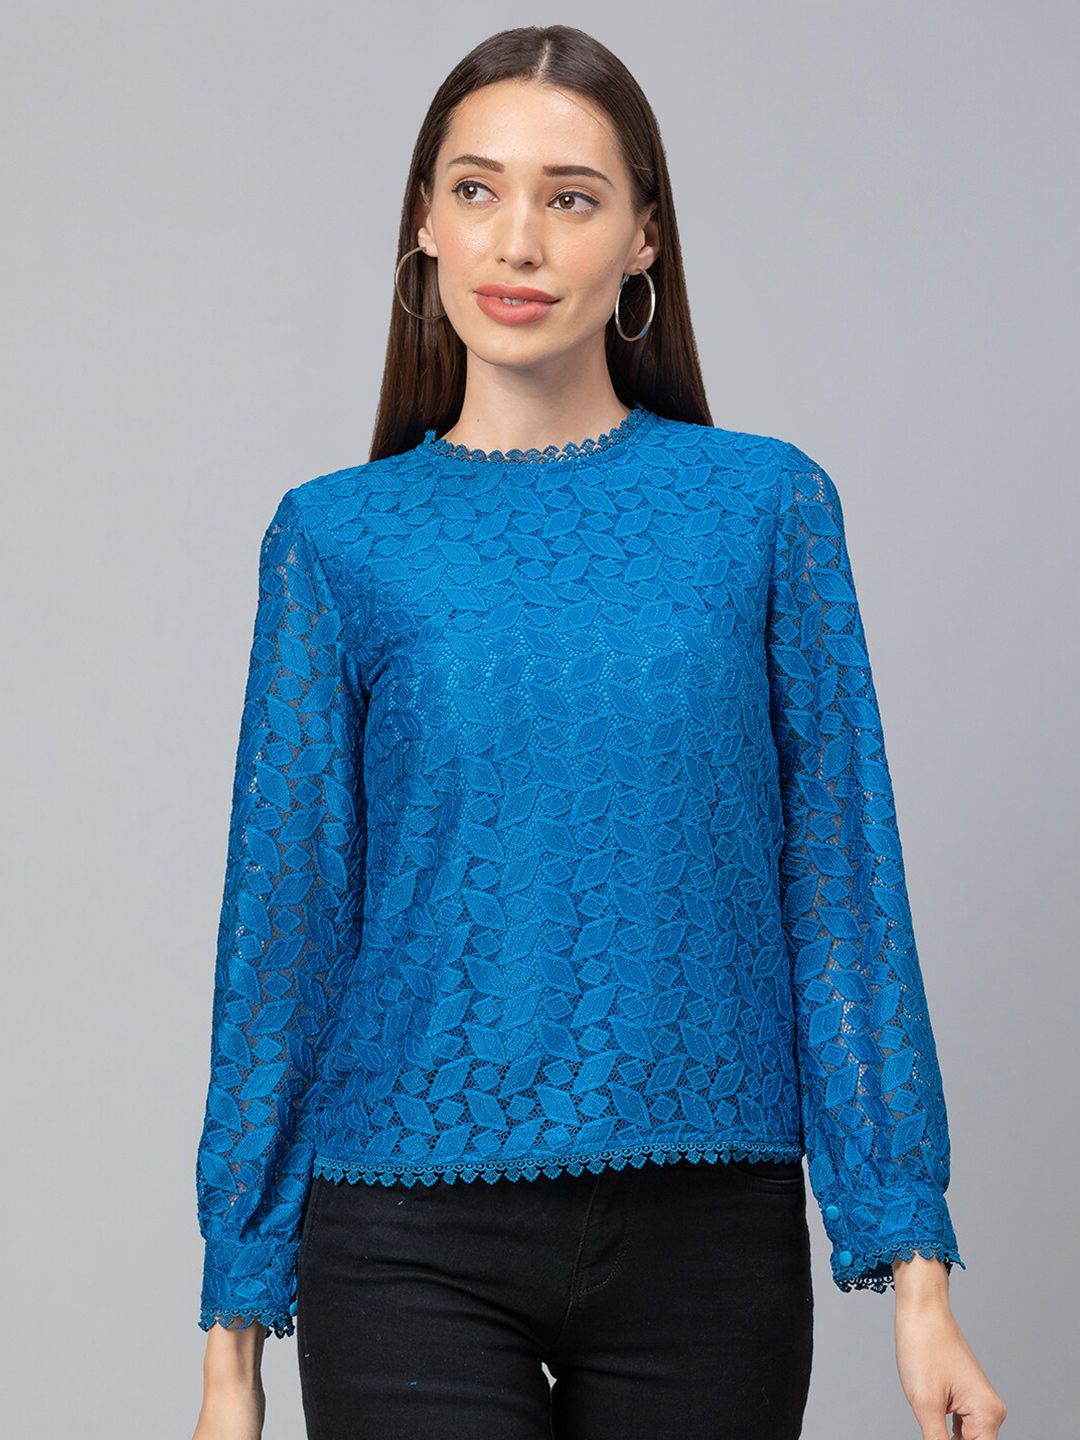 Globus Blue Women Long Sleeves Round Neck Lace Self Design Top Price in India